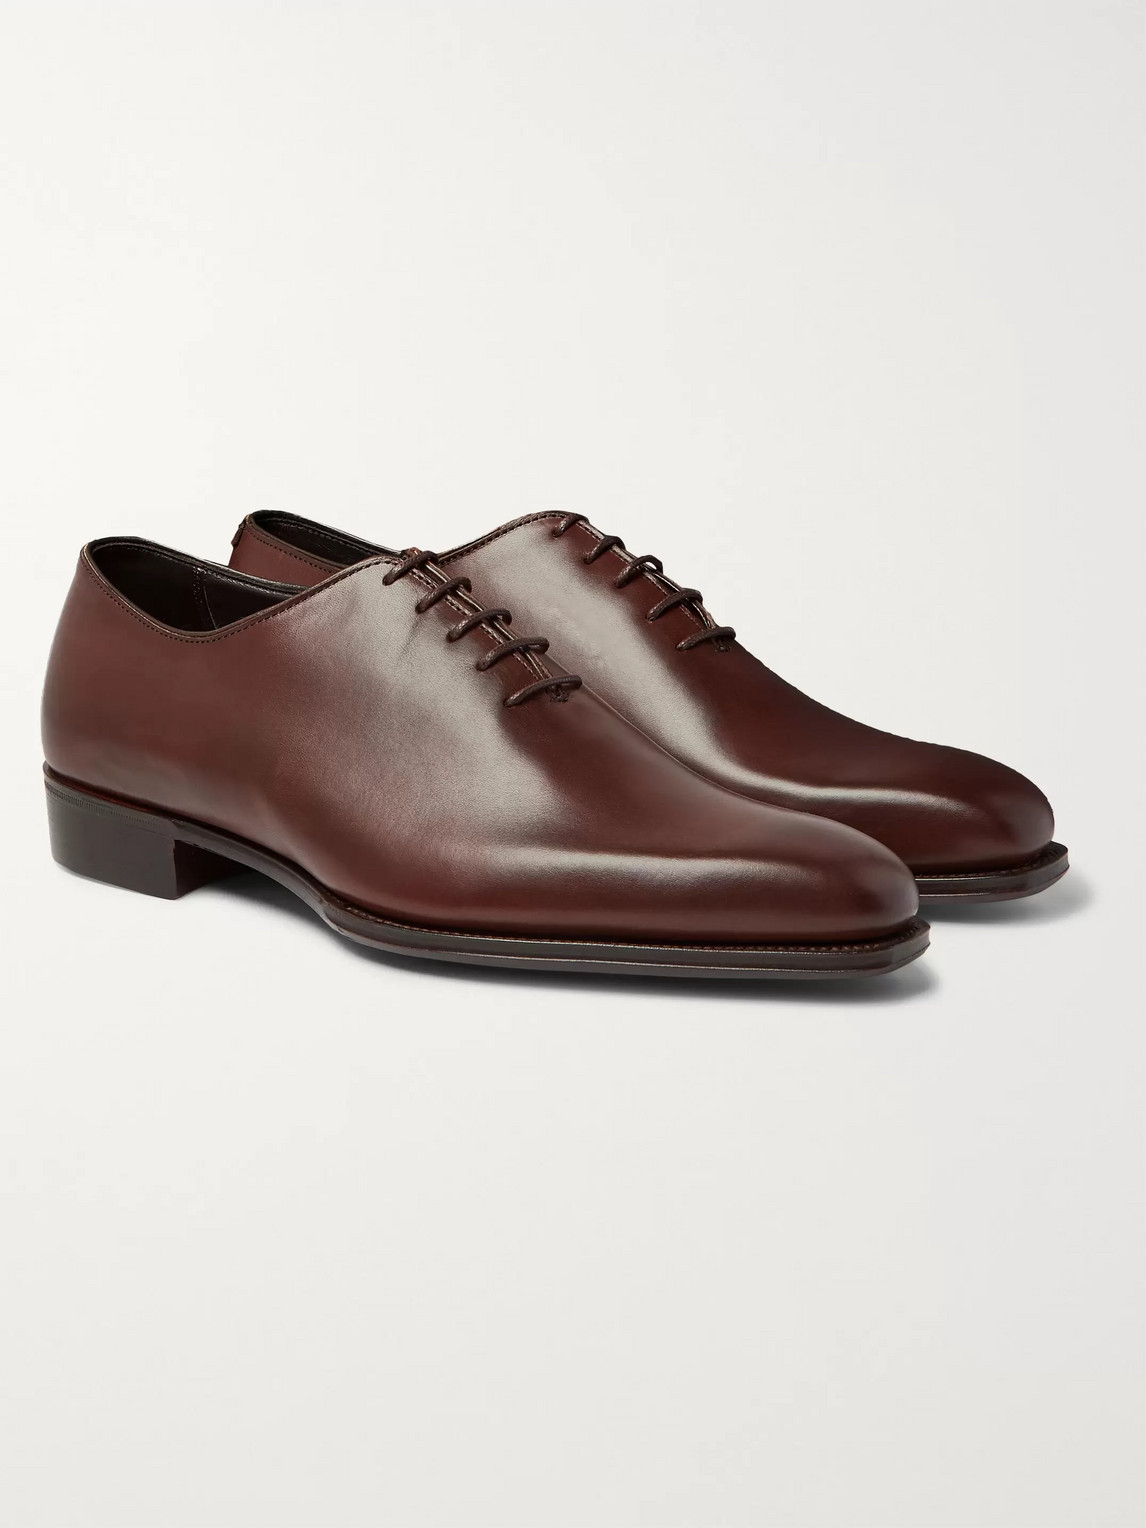 Kingsman George Cleverley Whole-cut Leather Oxford Shoes In Brown